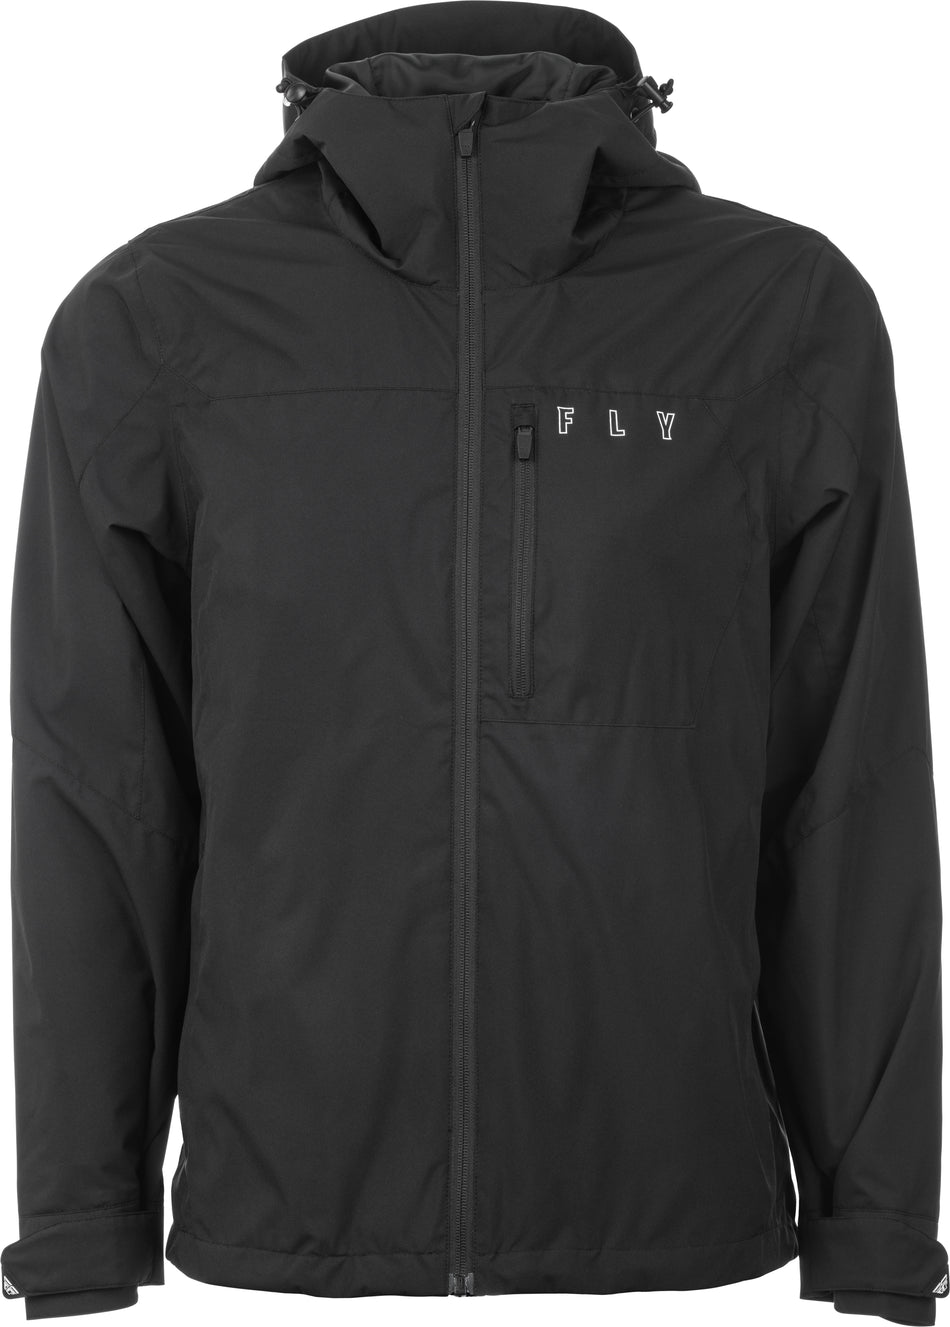 FLY RACING Fly Pit Jacket Black Md 354-6361M